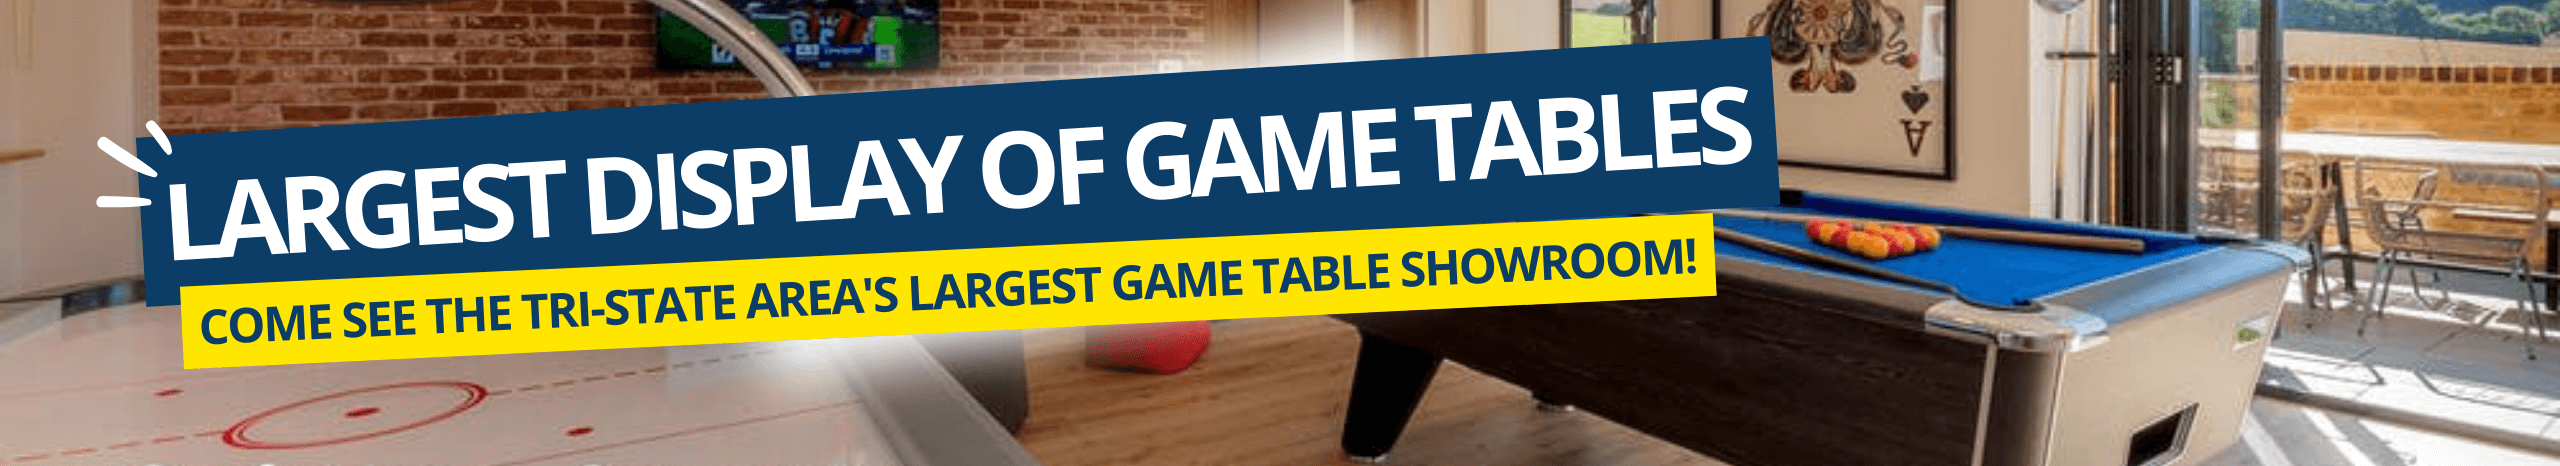 Game Tables NJ